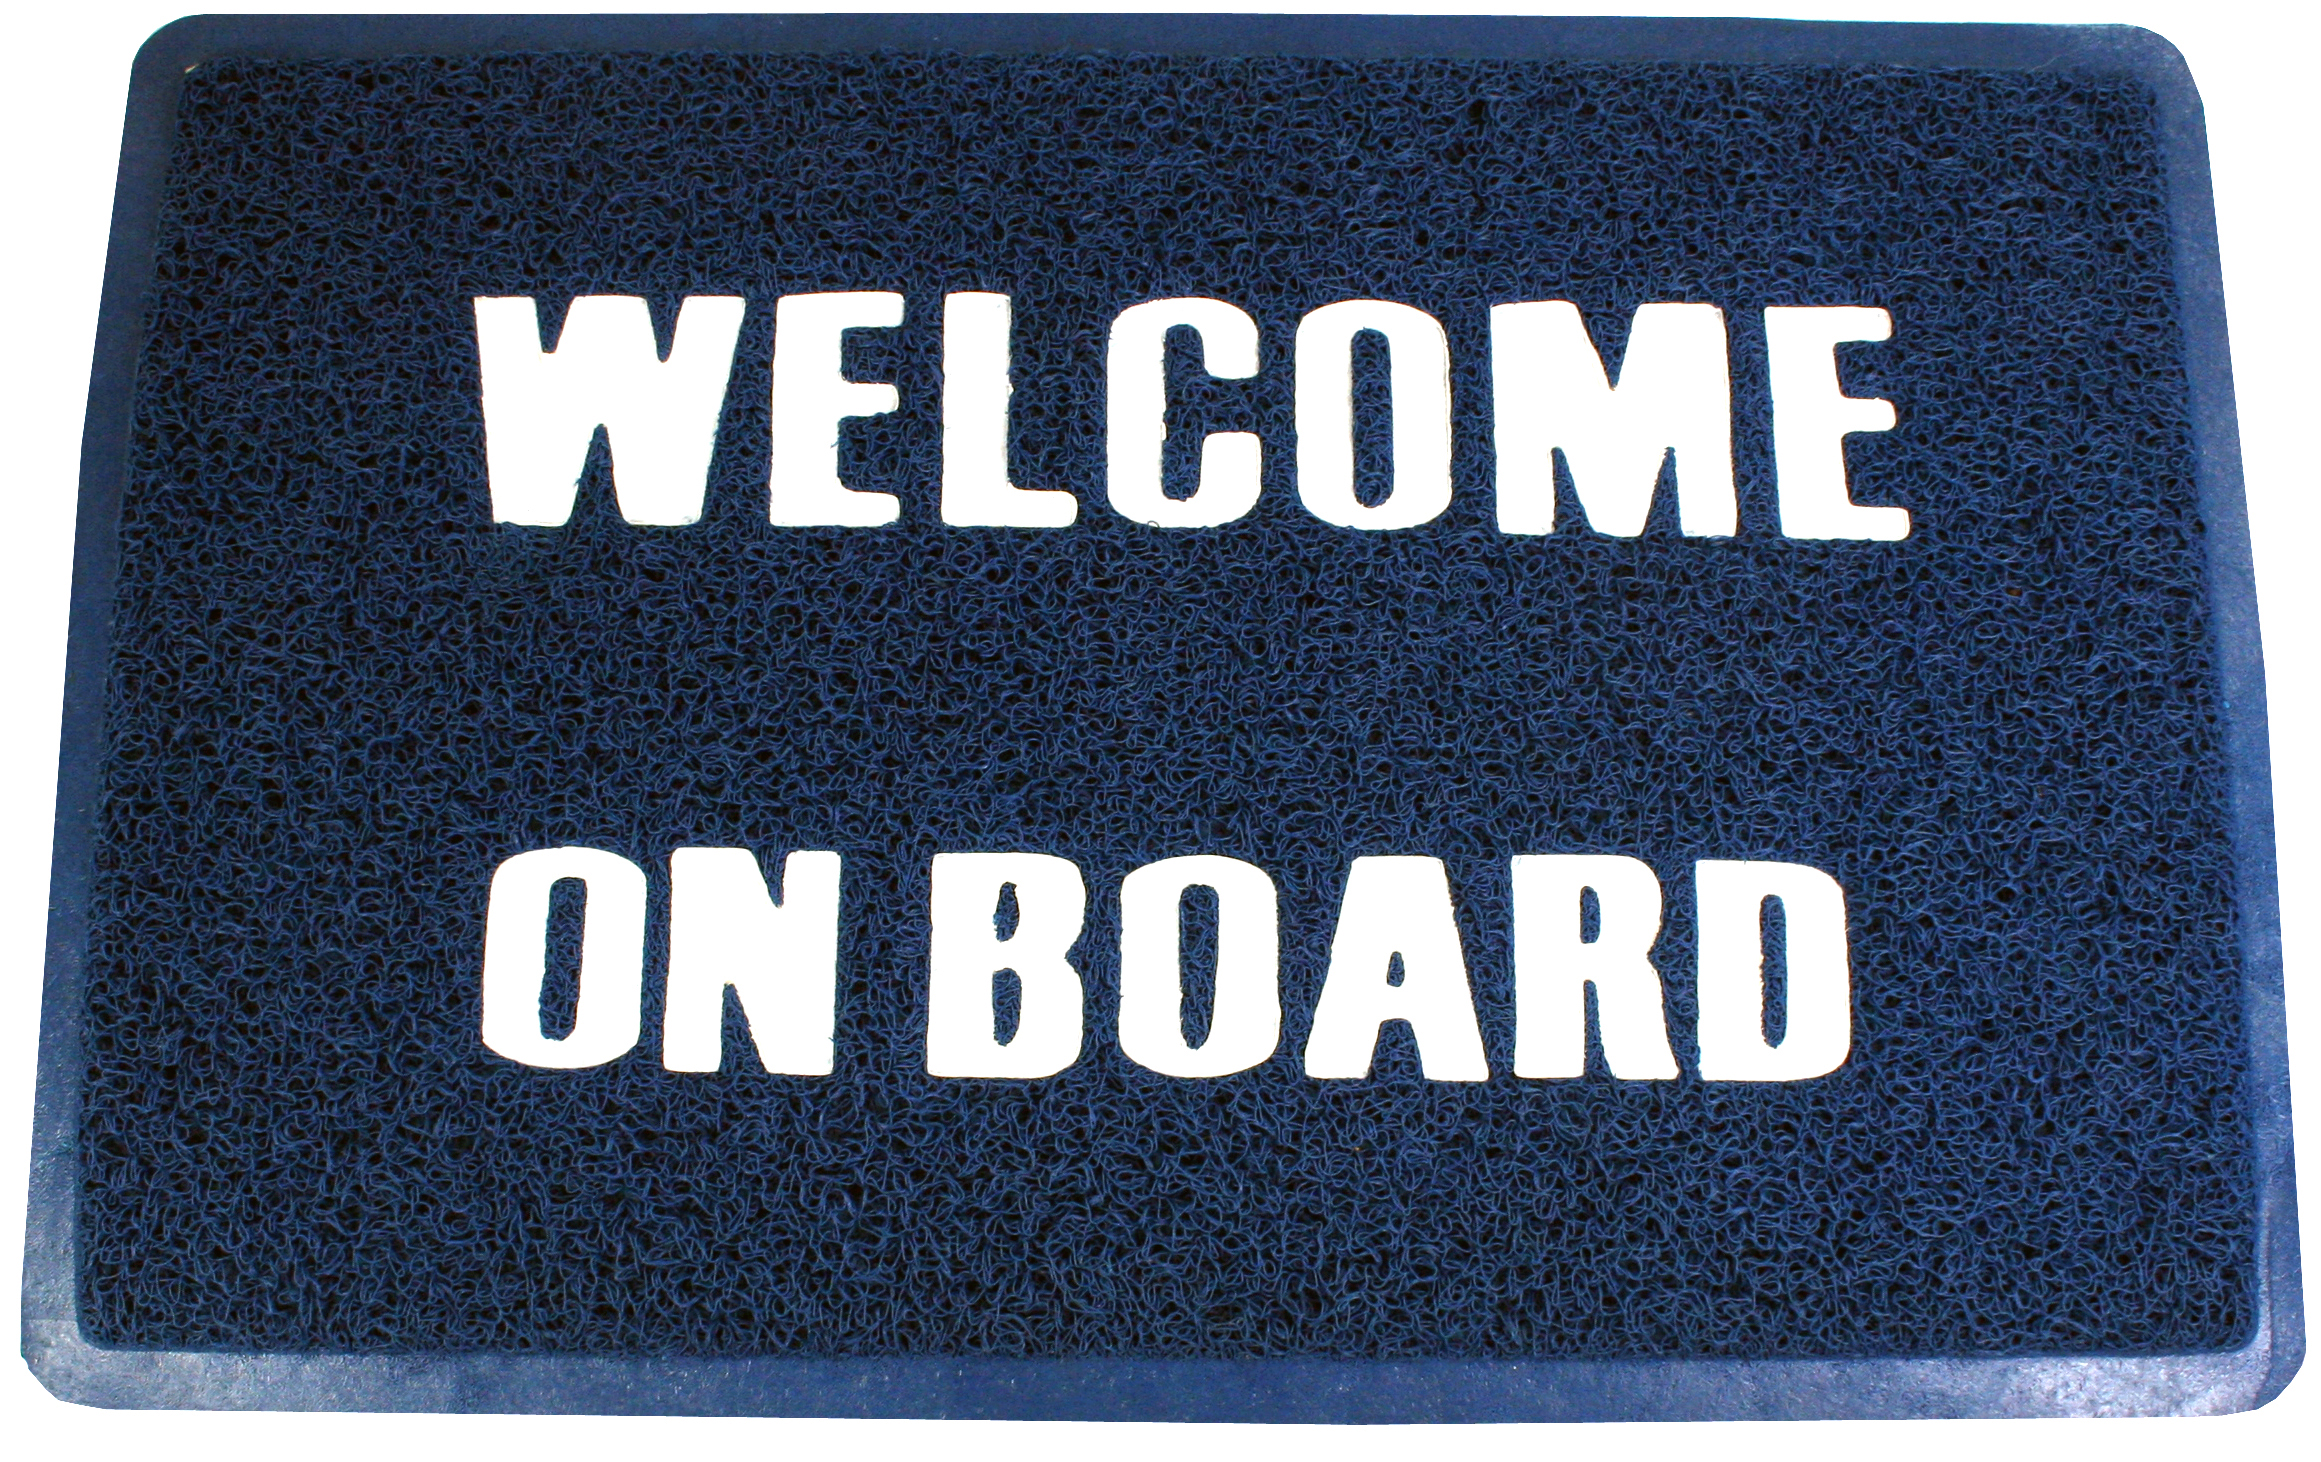 Matte "Welcome on board"